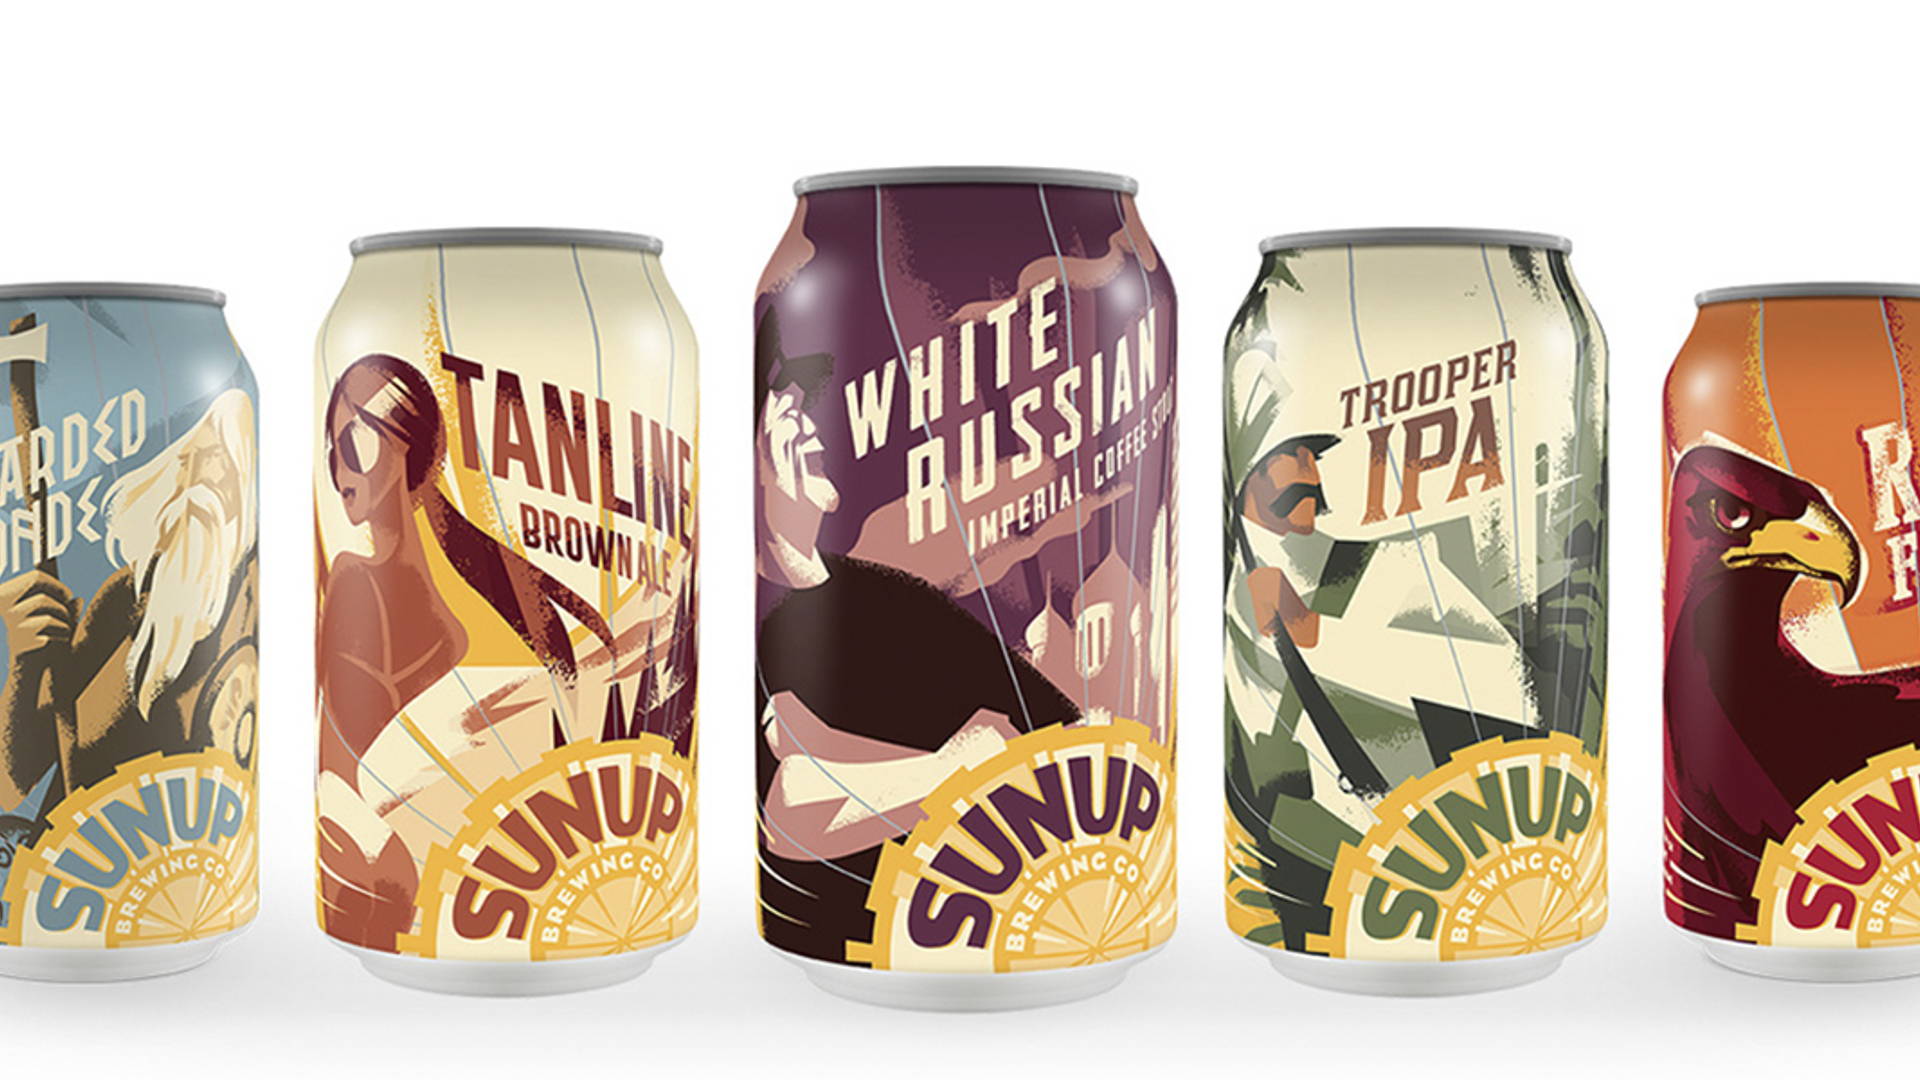 Featured image for SunUp Brewing Co.